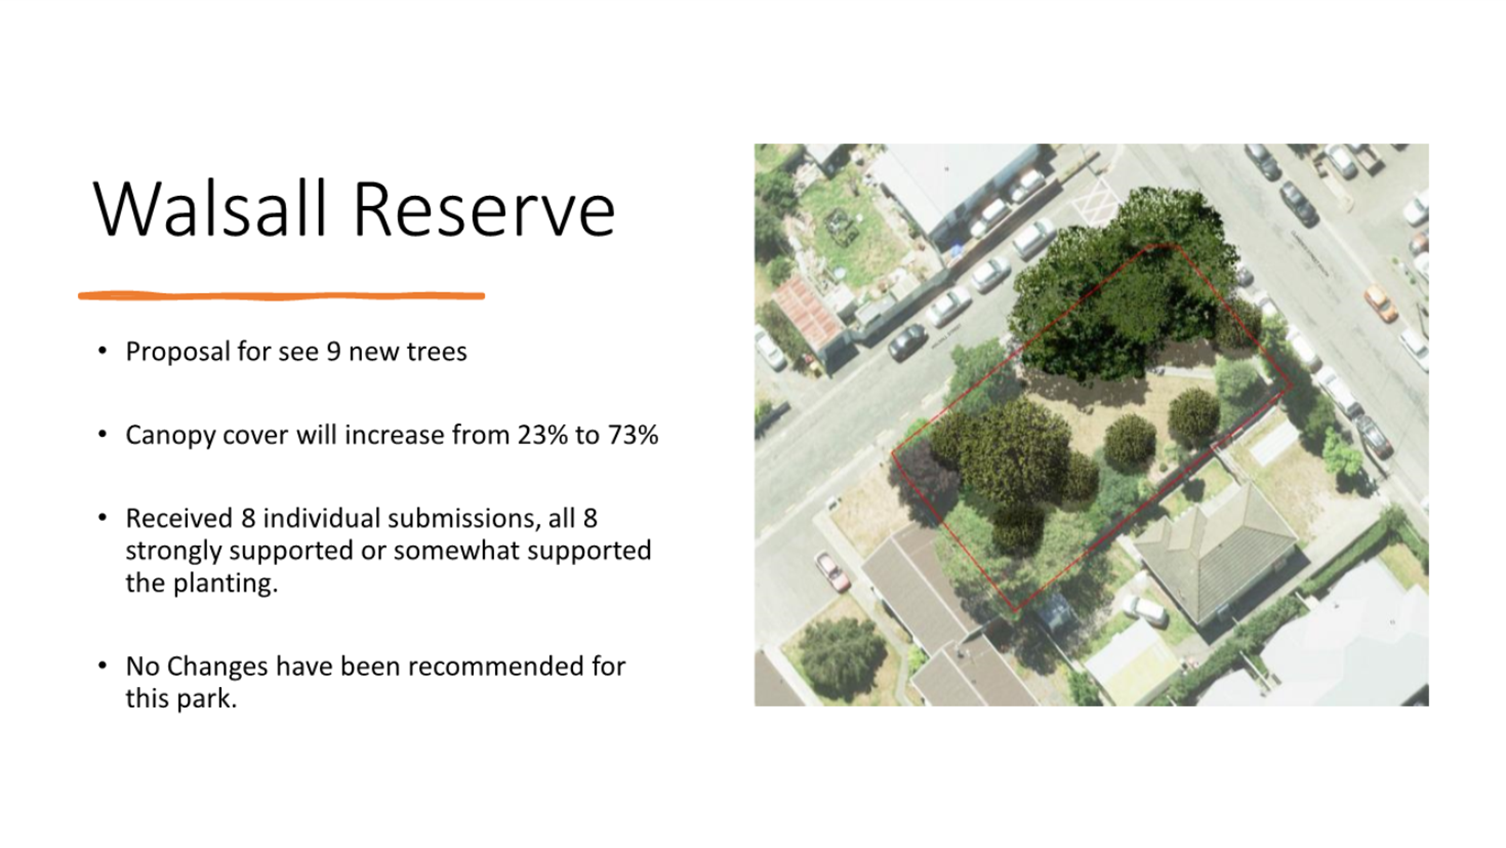 A bird's eye view of a reserve

Description automatically generated